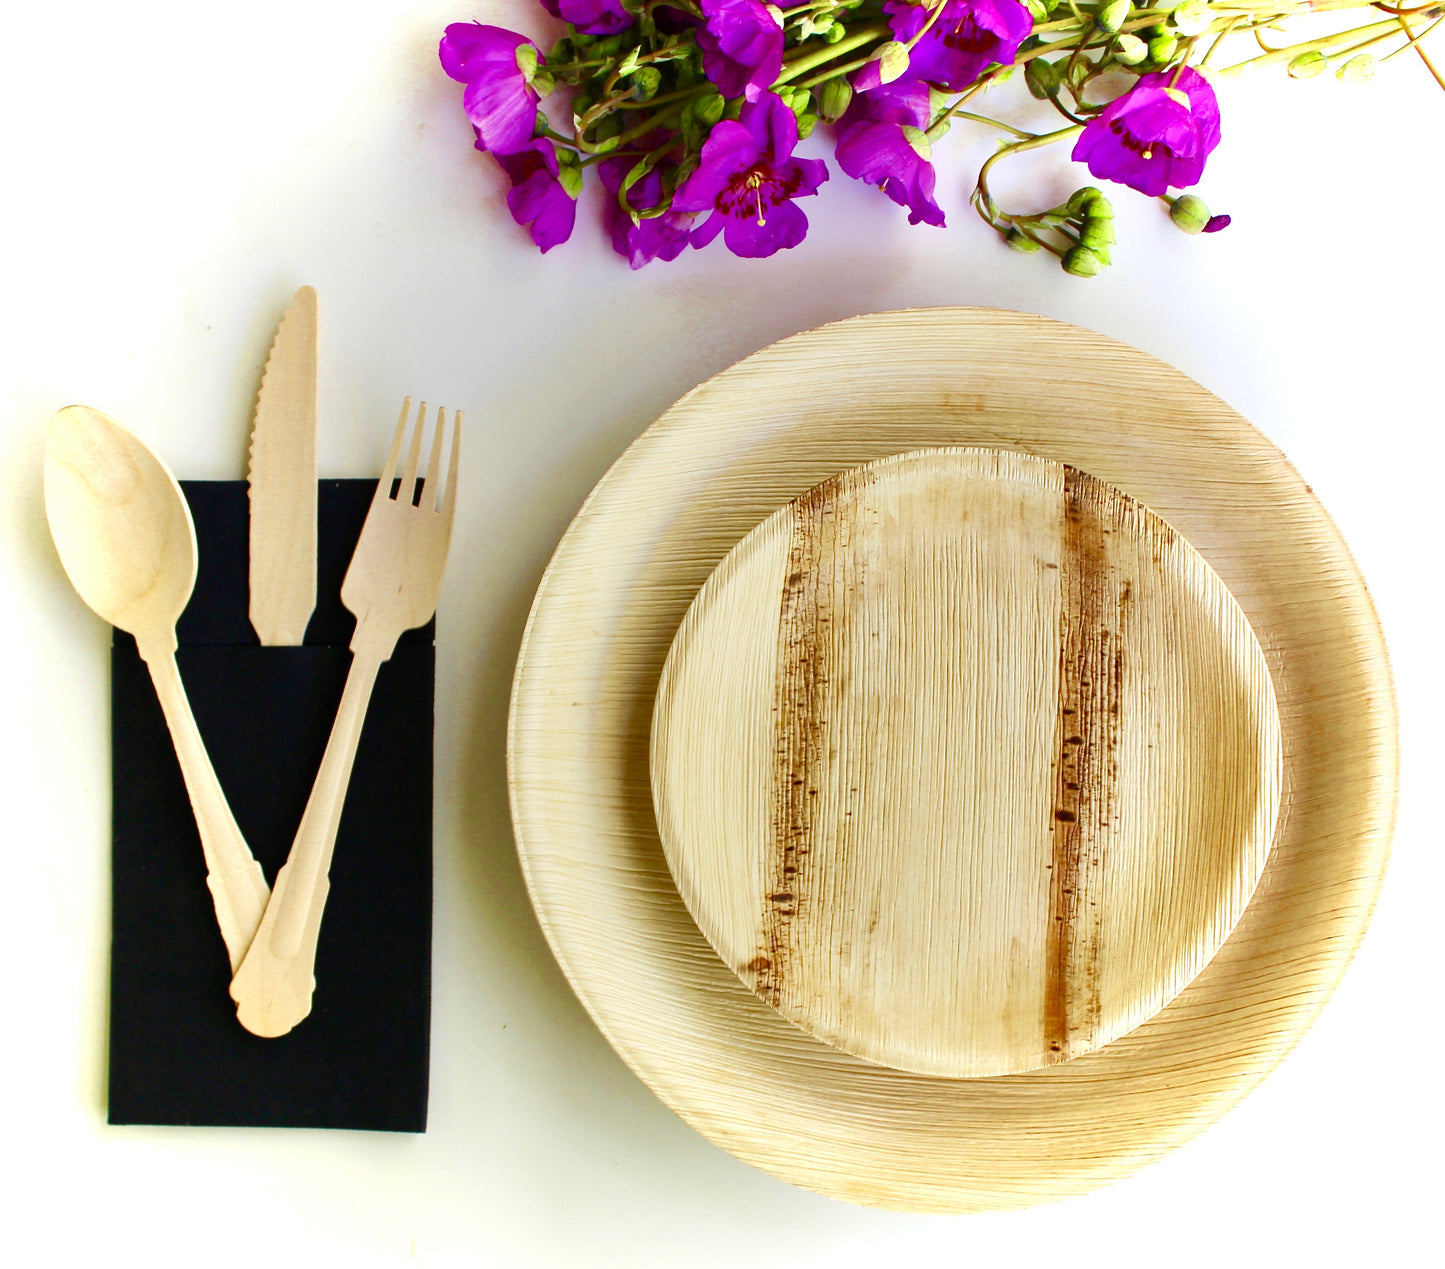 palm leaf dessert Plate 25 Pic 6" Square - 75 pic Fork - Spoon - Knife - Biodegradable